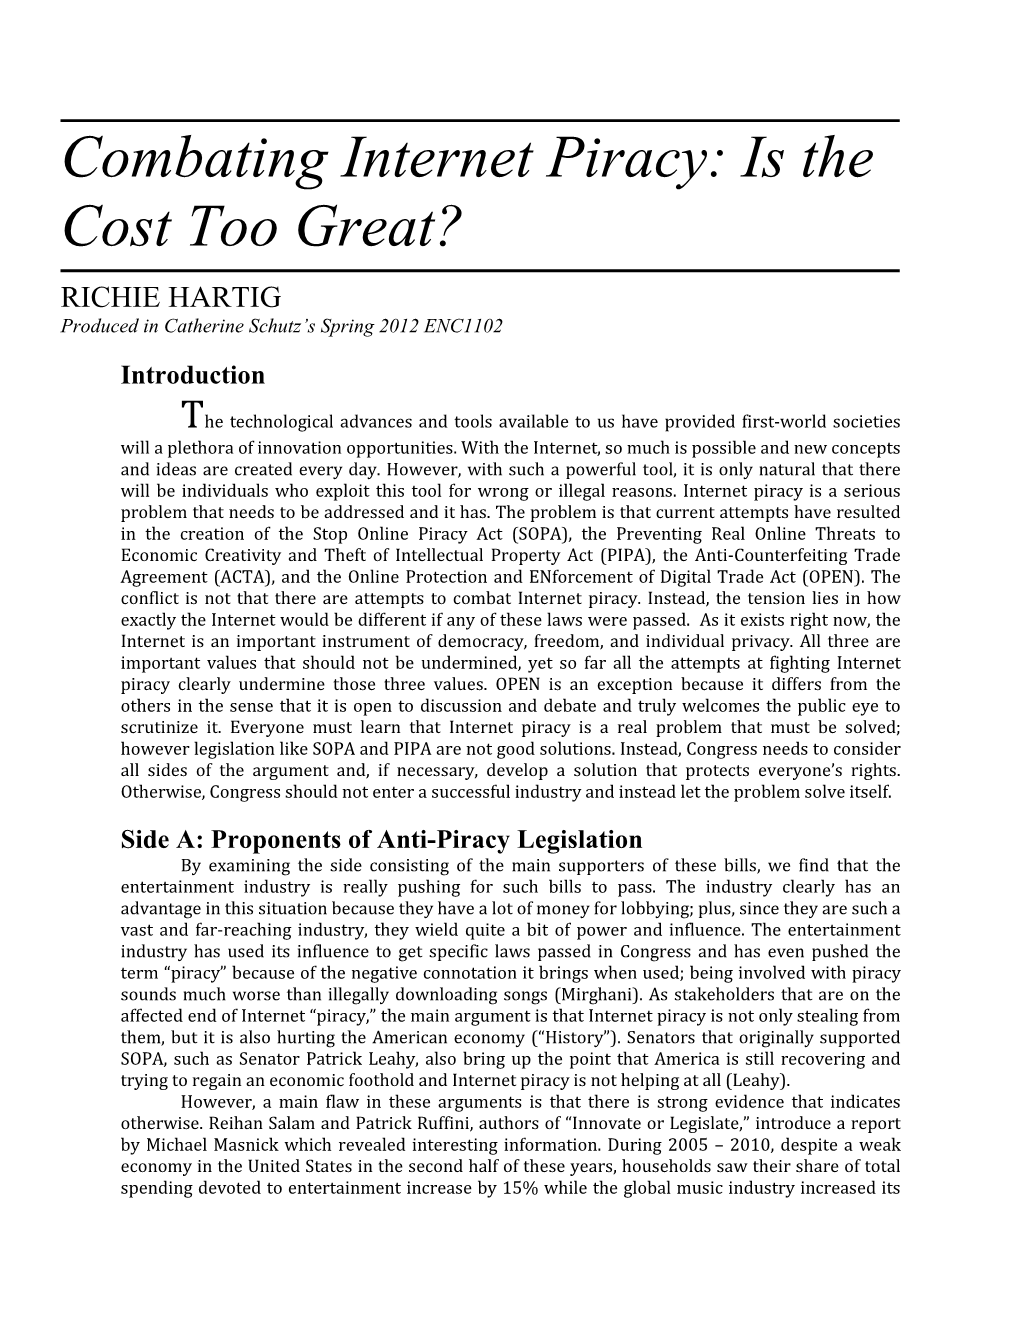 Combating Internet Piracy: Is the Cost Too Great?